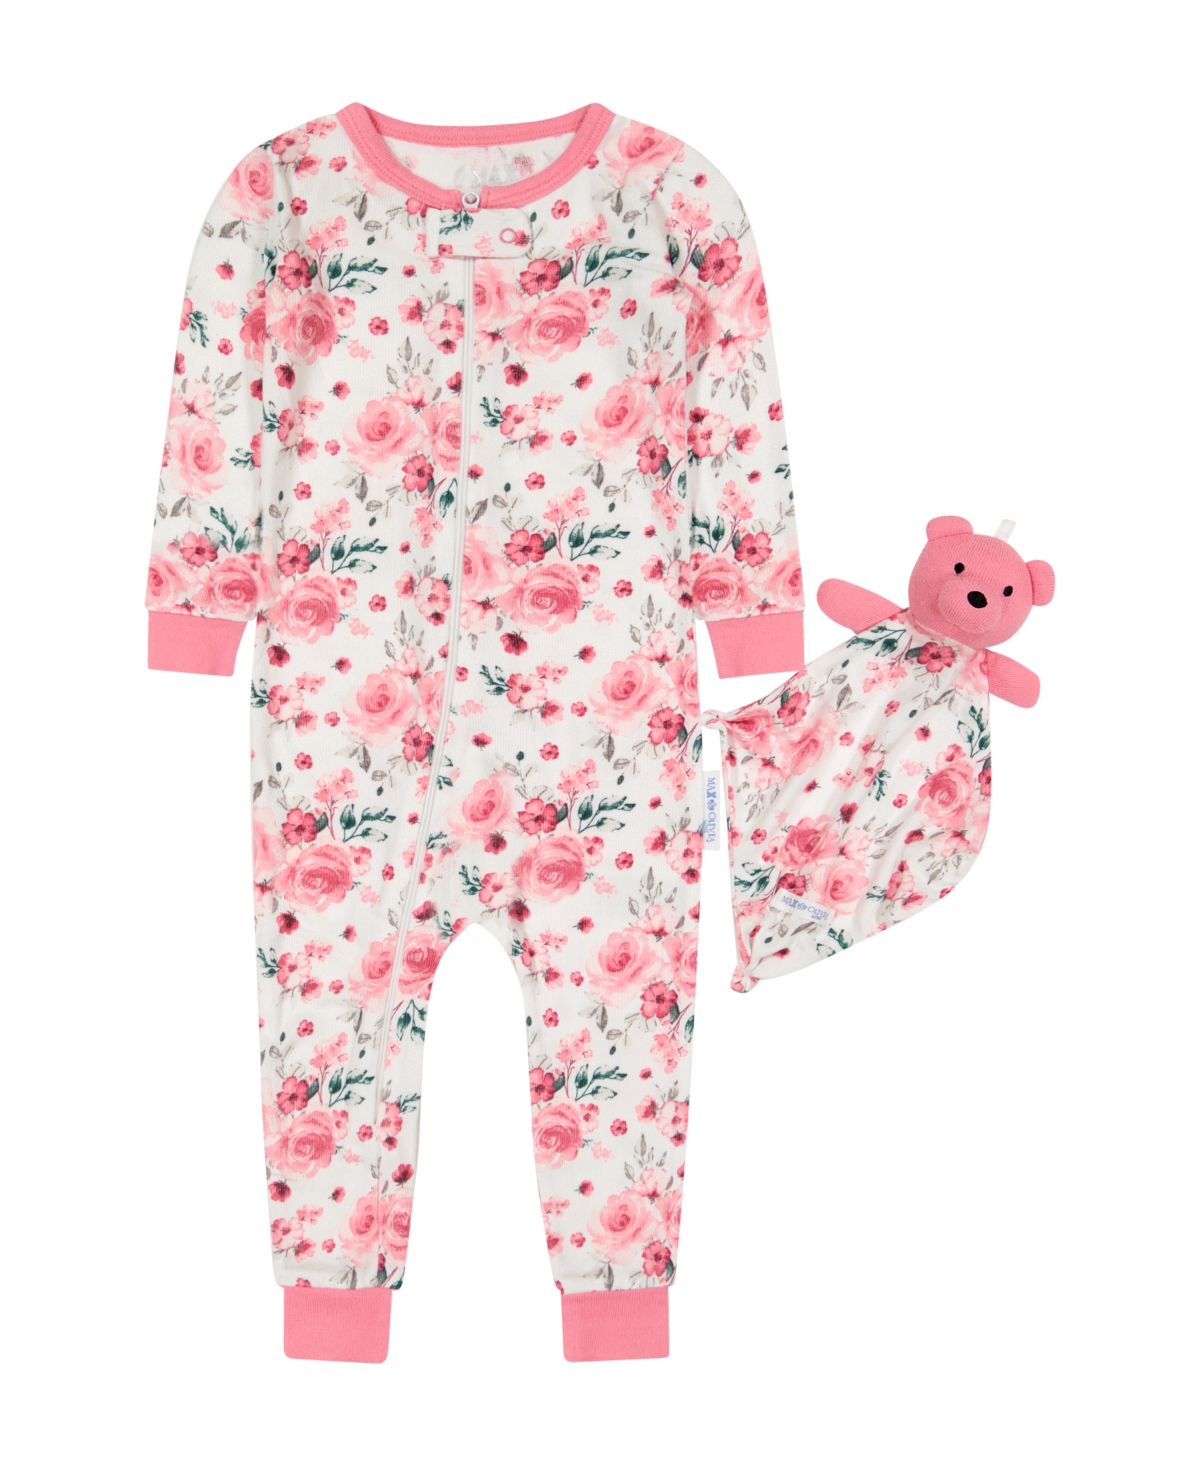 Max & Olivia Baby Girls Coverall And Matching Blanket, 2-piece Set In Pink